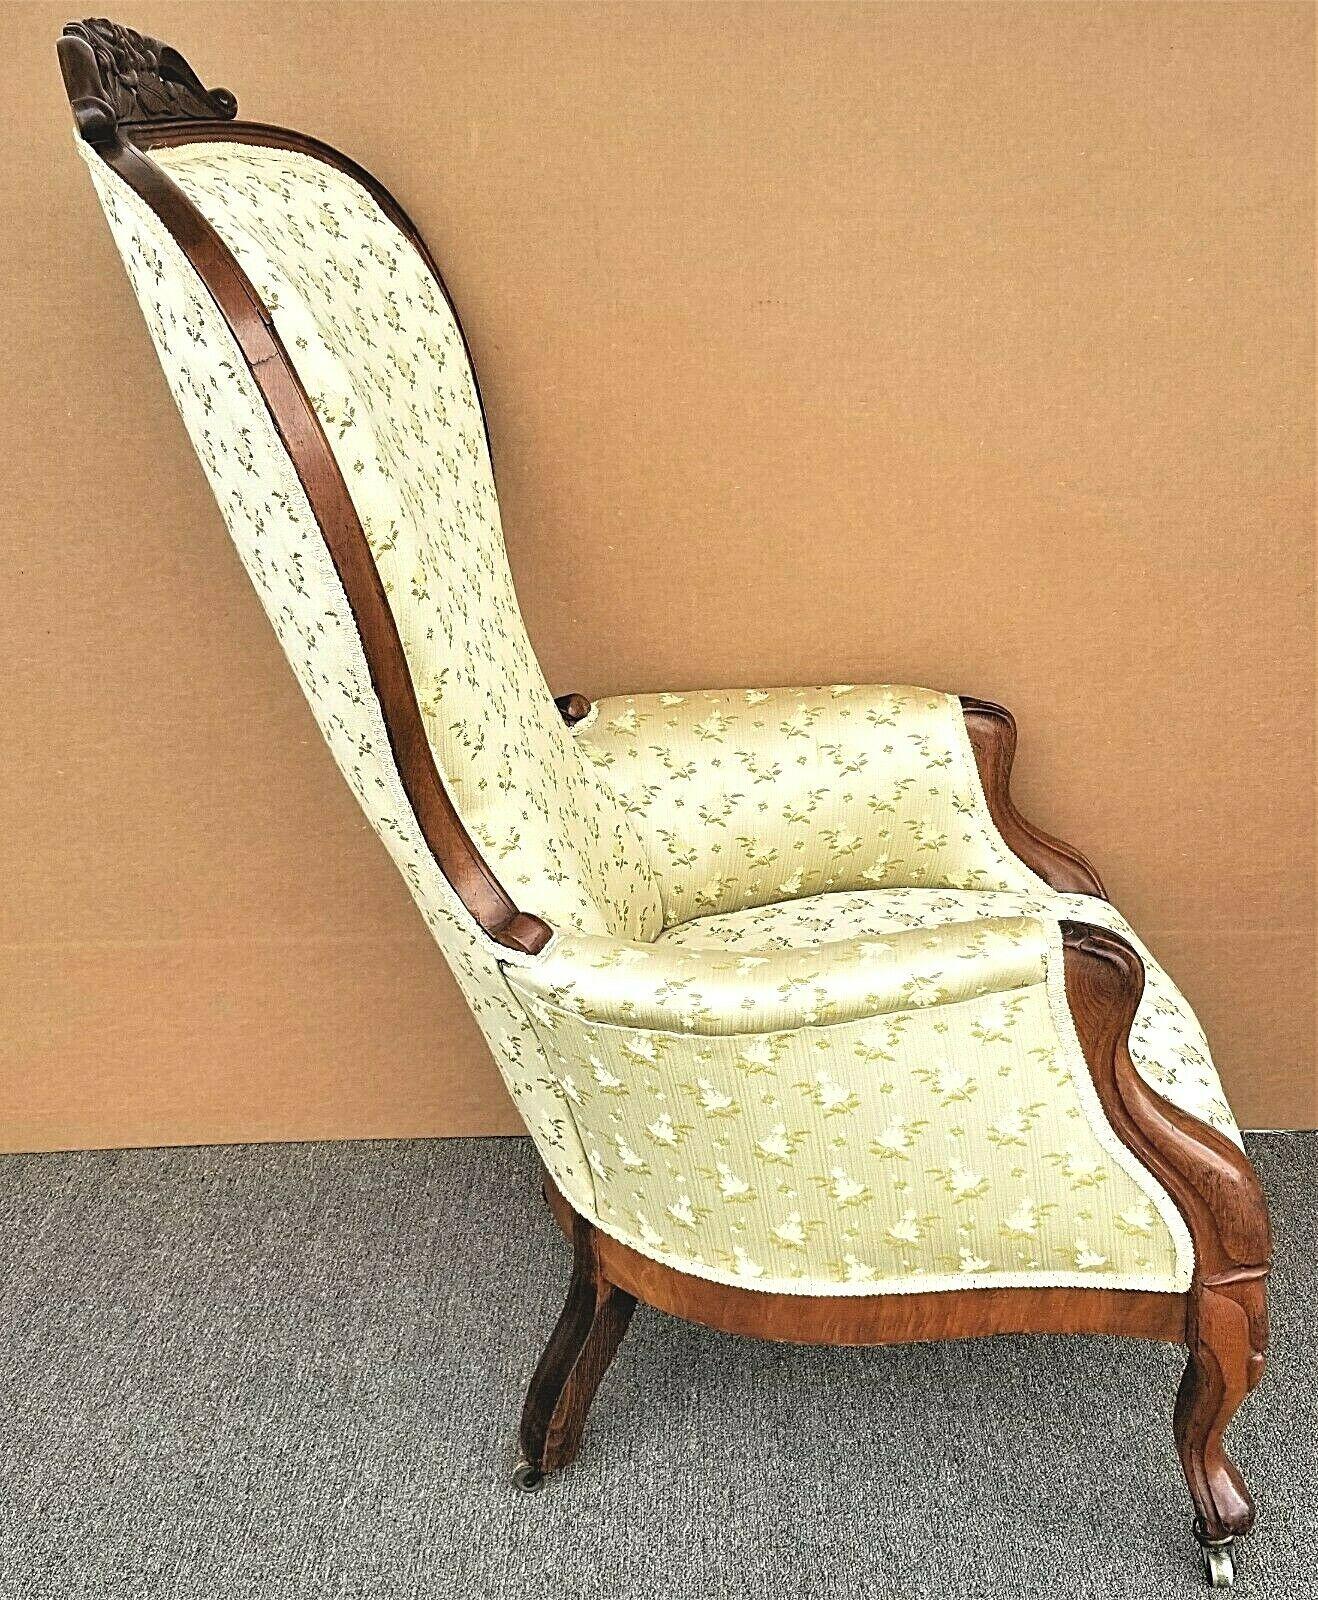 American Antique Victorian Balloon Back Parlor Armchair For Sale